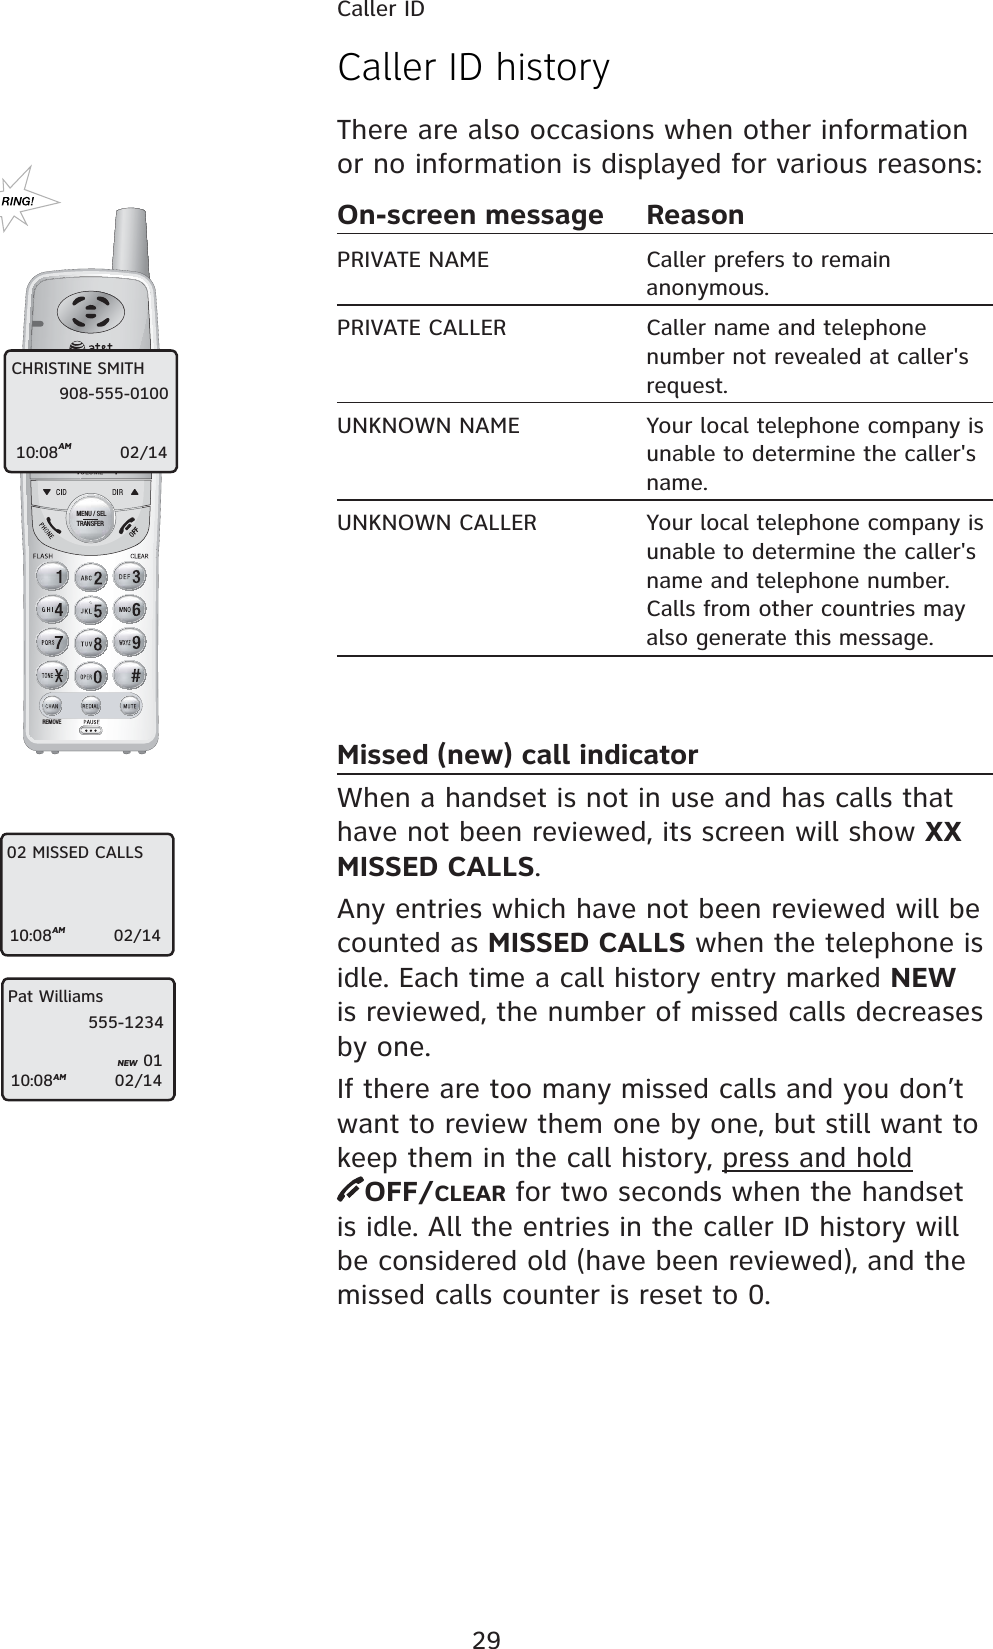 29Caller IDREMOVEMENU / SELTRANSFERCaller ID historyThere are also occasions when other information or no information is displayed for various reasons:On-screen message  ReasonPRIVATE NAME  Caller prefers to remain anonymous. PRIVATE CALLER  Caller name and telephone number not revealed at caller&apos;s request.UNKNOWN NAME  Your local telephone company is unable to determine the caller&apos;s name.UNKNOWN CALLER  Your local telephone company is unable to determine the caller&apos;s name and telephone number. Calls from other countries may also generate this message.Missed (new) call indicatorWhen a handset is not in use and has calls that have not been reviewed, its screen will show XX MISSED CALLS. Any entries which have not been reviewed will be counted as MISSED CALLS when the telephone is idle. Each time a call history entry marked NEW is reviewed, the number of missed calls decreases by one. If there are too many missed calls and you don’t want to review them one by one, but still want to keep them in the call history, press and hold OFF/CLEAR for two seconds when the handset is idle. All the entries in the caller ID history will be considered old (have been reviewed), and the missed calls counter is reset to 0.CHRISTINE SMITH10:08AM                   02/14908-555-010002 MISSED CALLS10:08AM                   02/14Pat Williams10:08AM                   02/14555-123401NEW